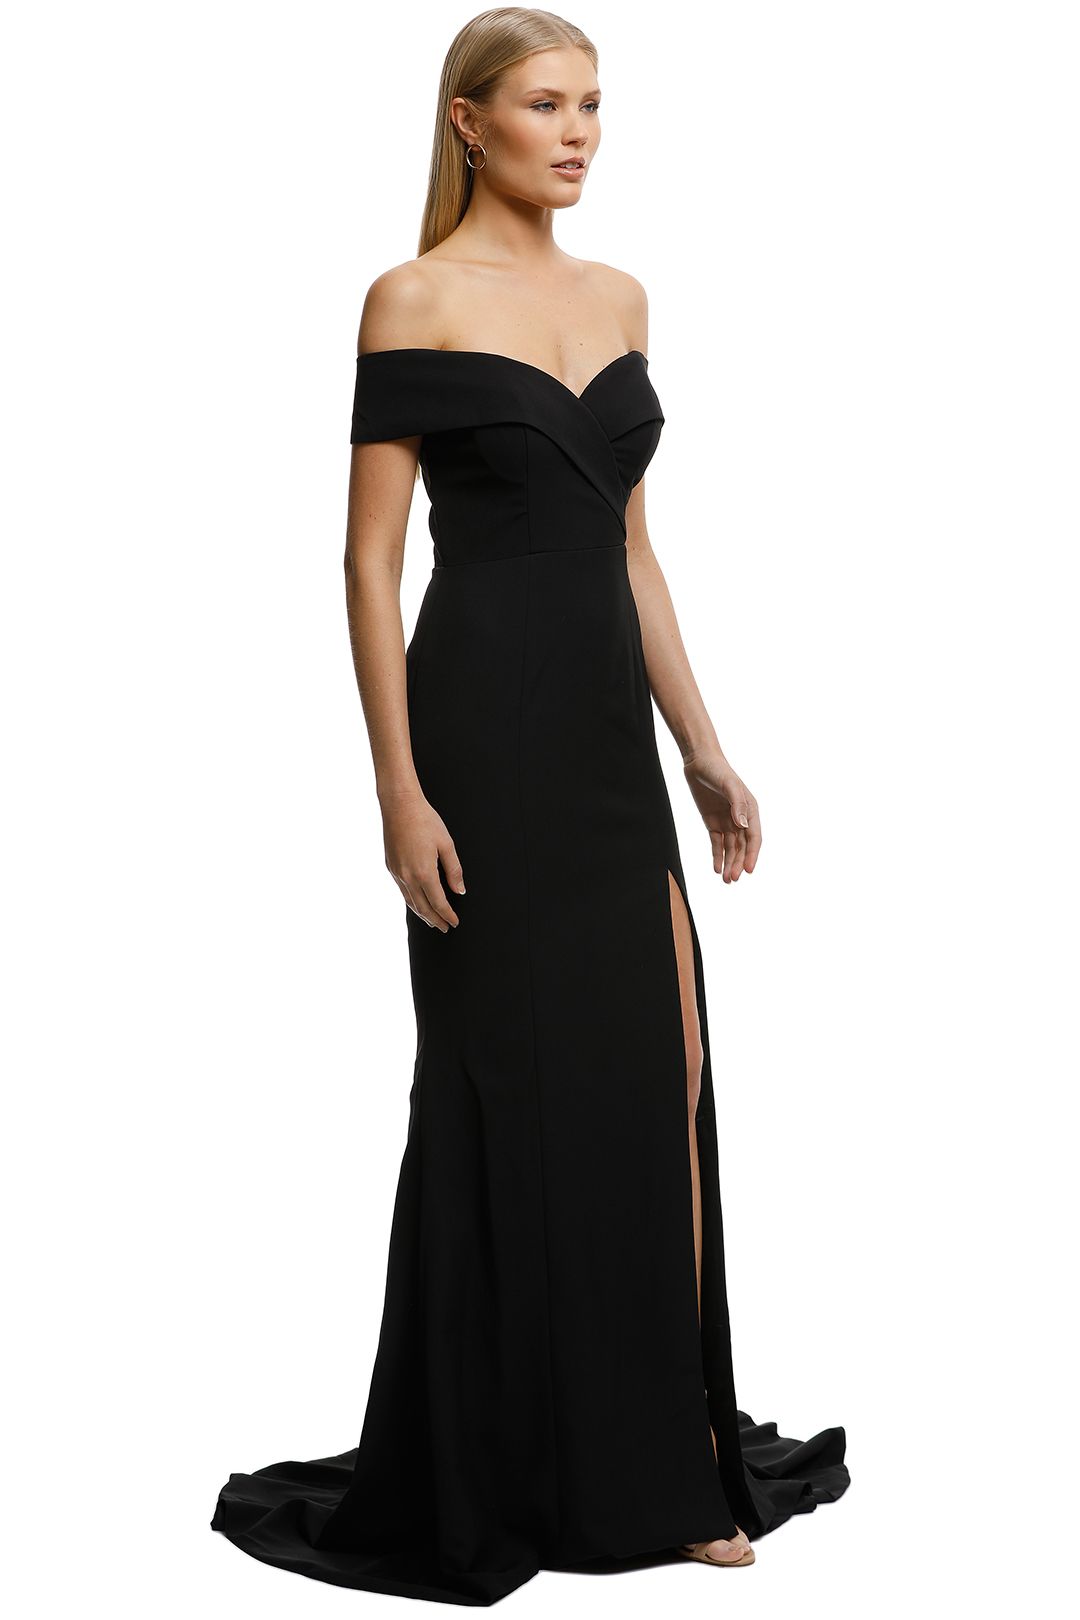 Gia Off Shoulder Gown in Black by Samantha Rose for Hire